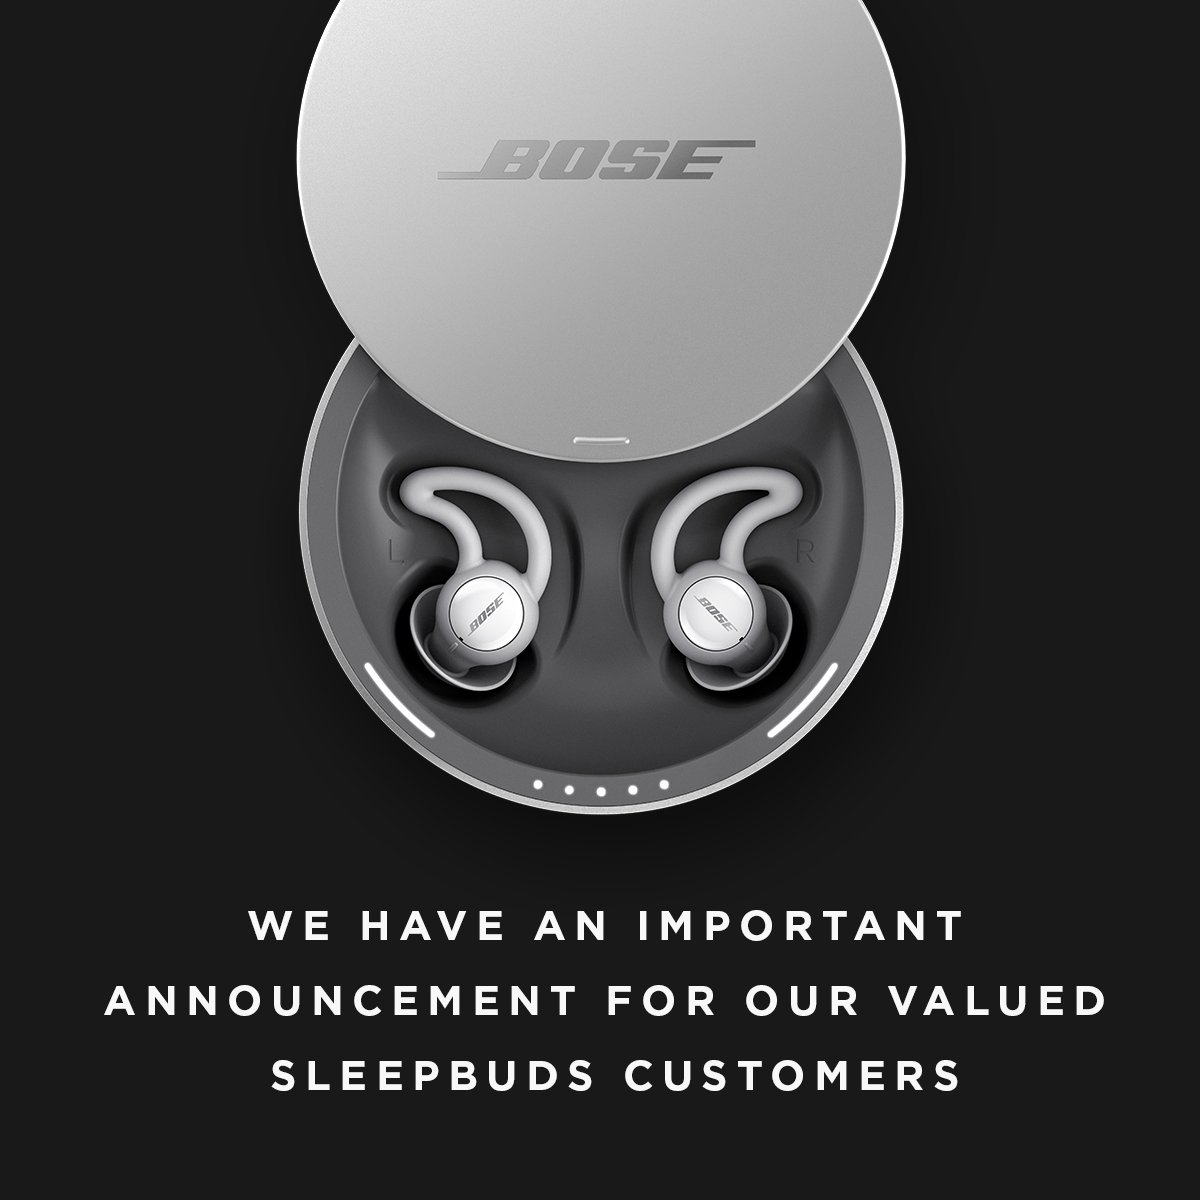 Bose on Twitter: "We encourage our sleepbuds customers to click link for a detailed announcement and additional customer support resources: https://t.co/2LQr0tR8XL https://t.co/0o0lbYRKhs" /